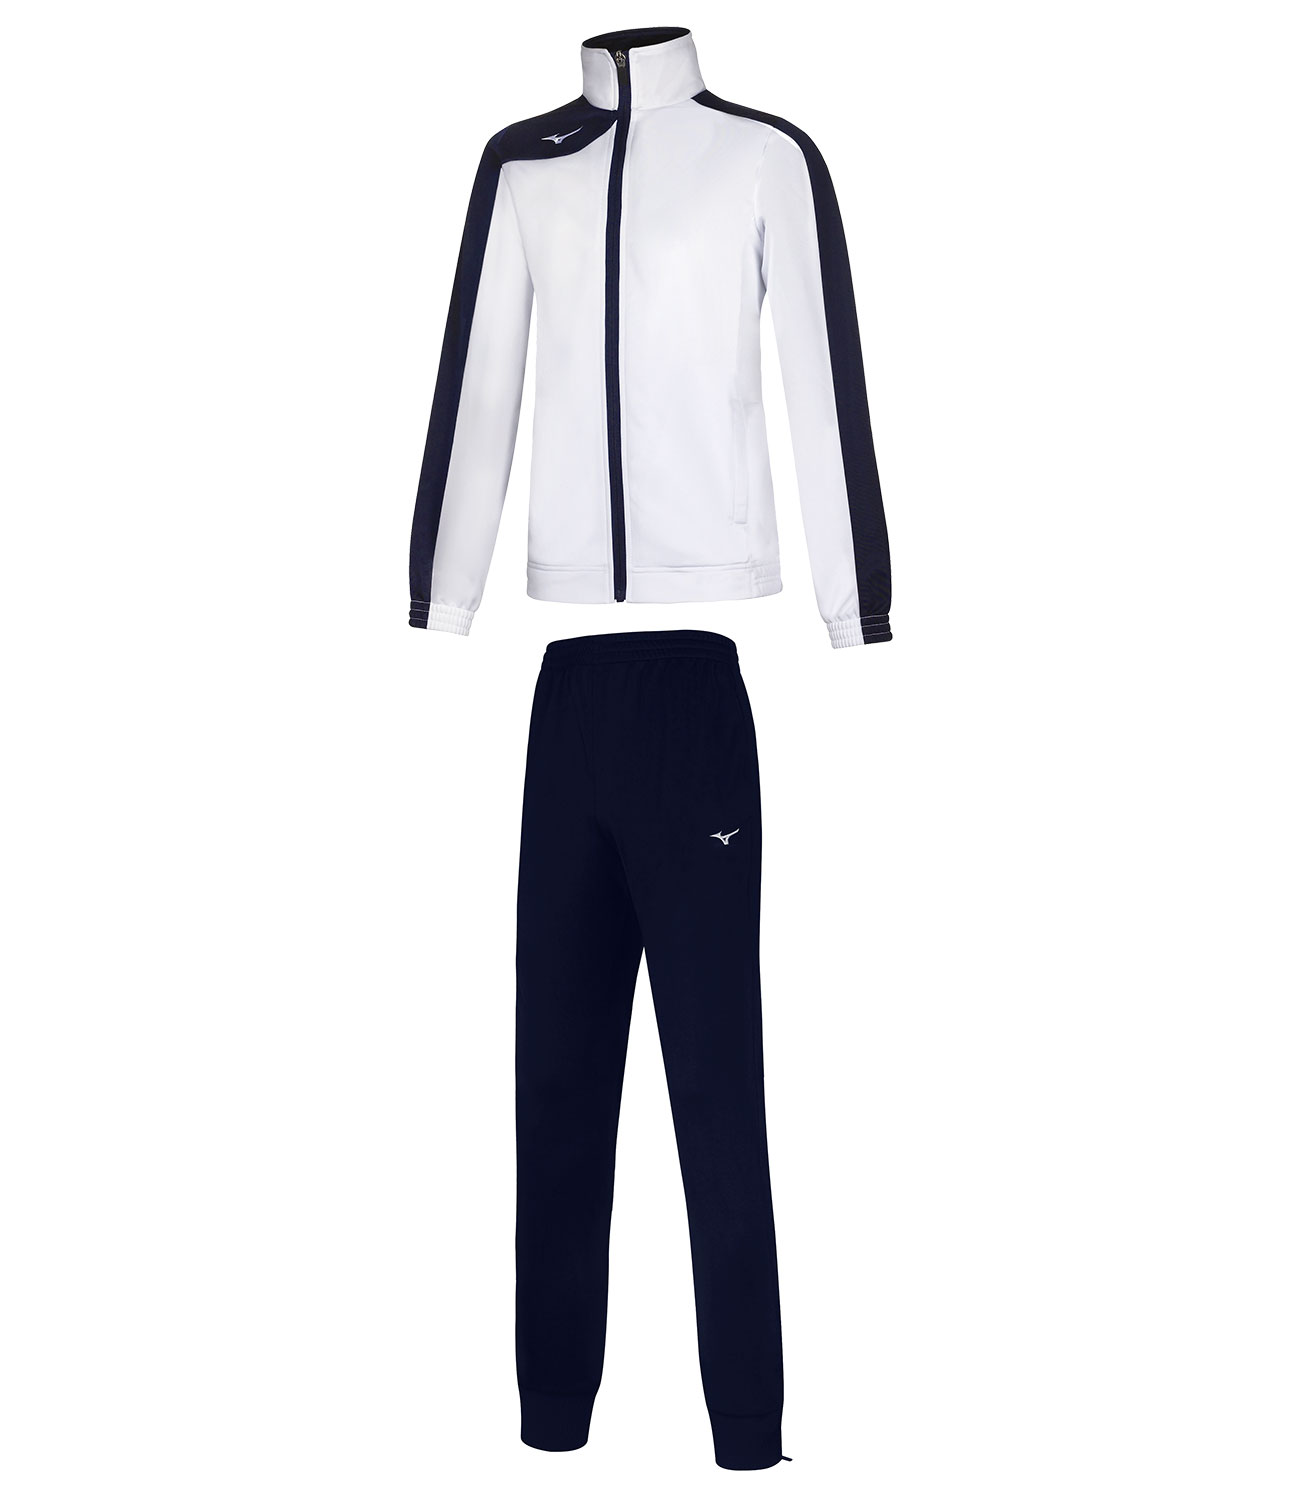 Tracksuit fitted Tracksuits. store.yeezyseason1.com